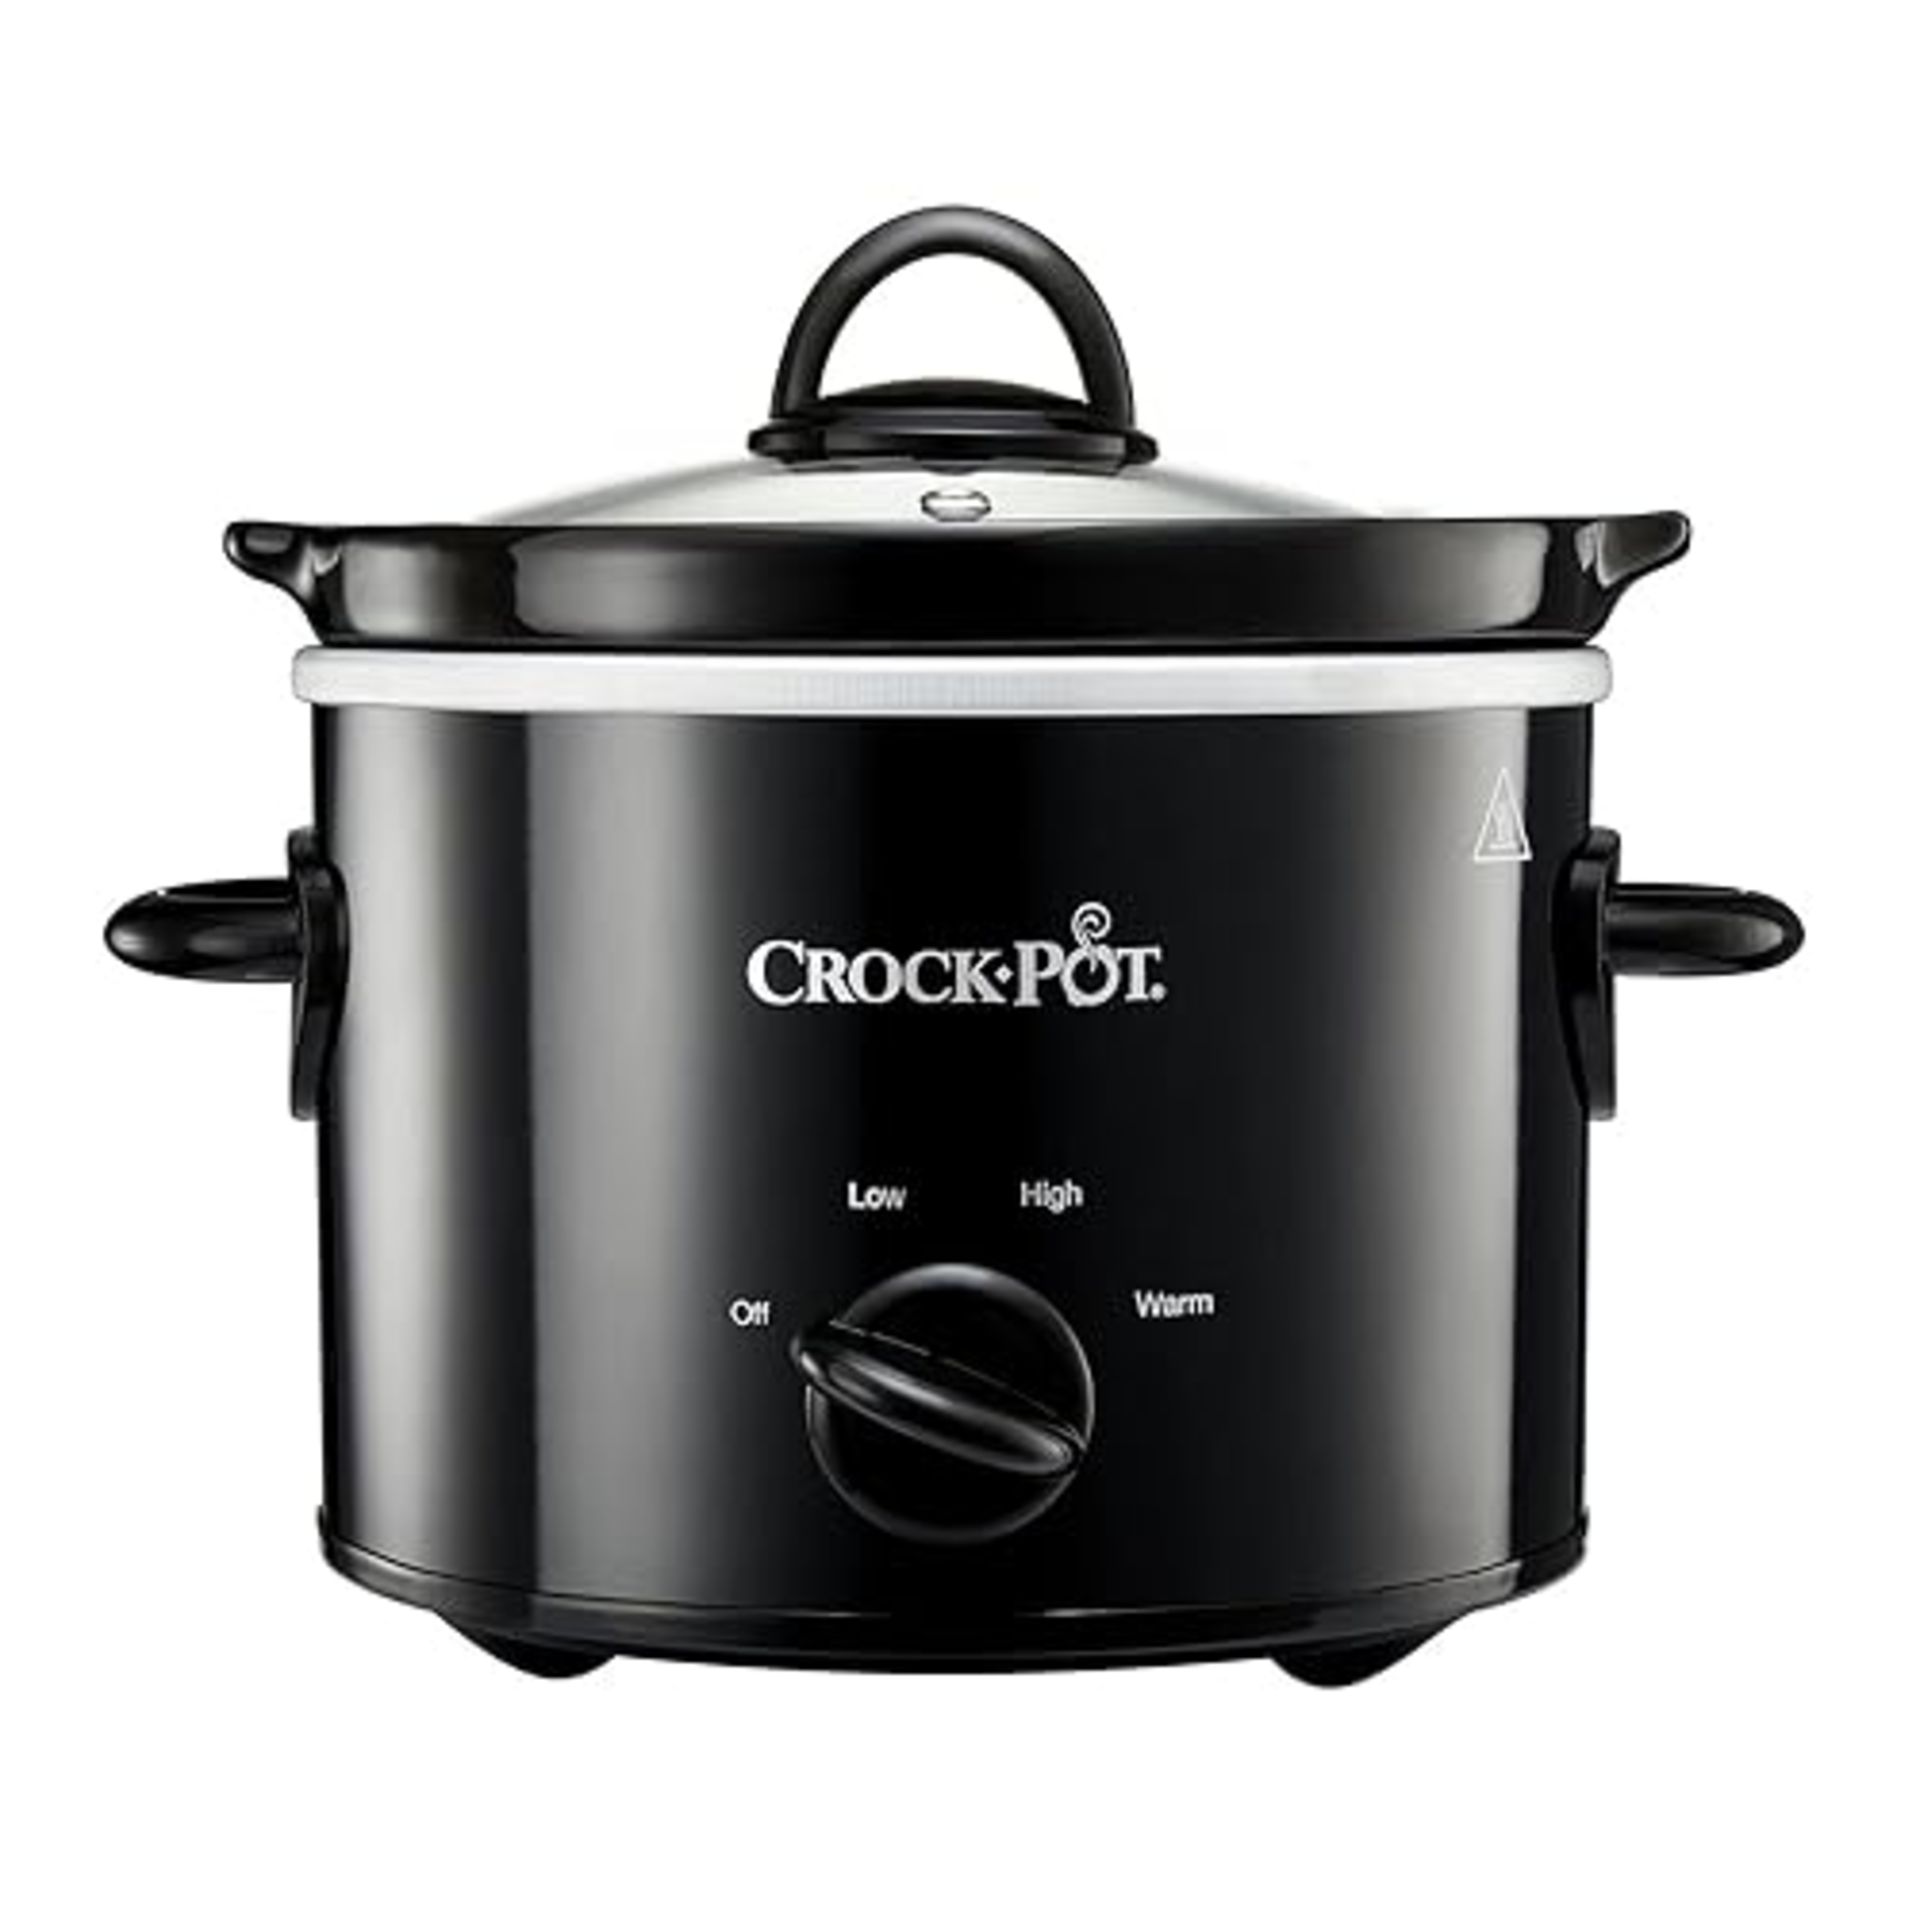 Crockpot Slow Cooker | Removable Easy-Clean Ceramic Bowl | 1.8 L Small Slow Cooker (Serves 1-2 Peop